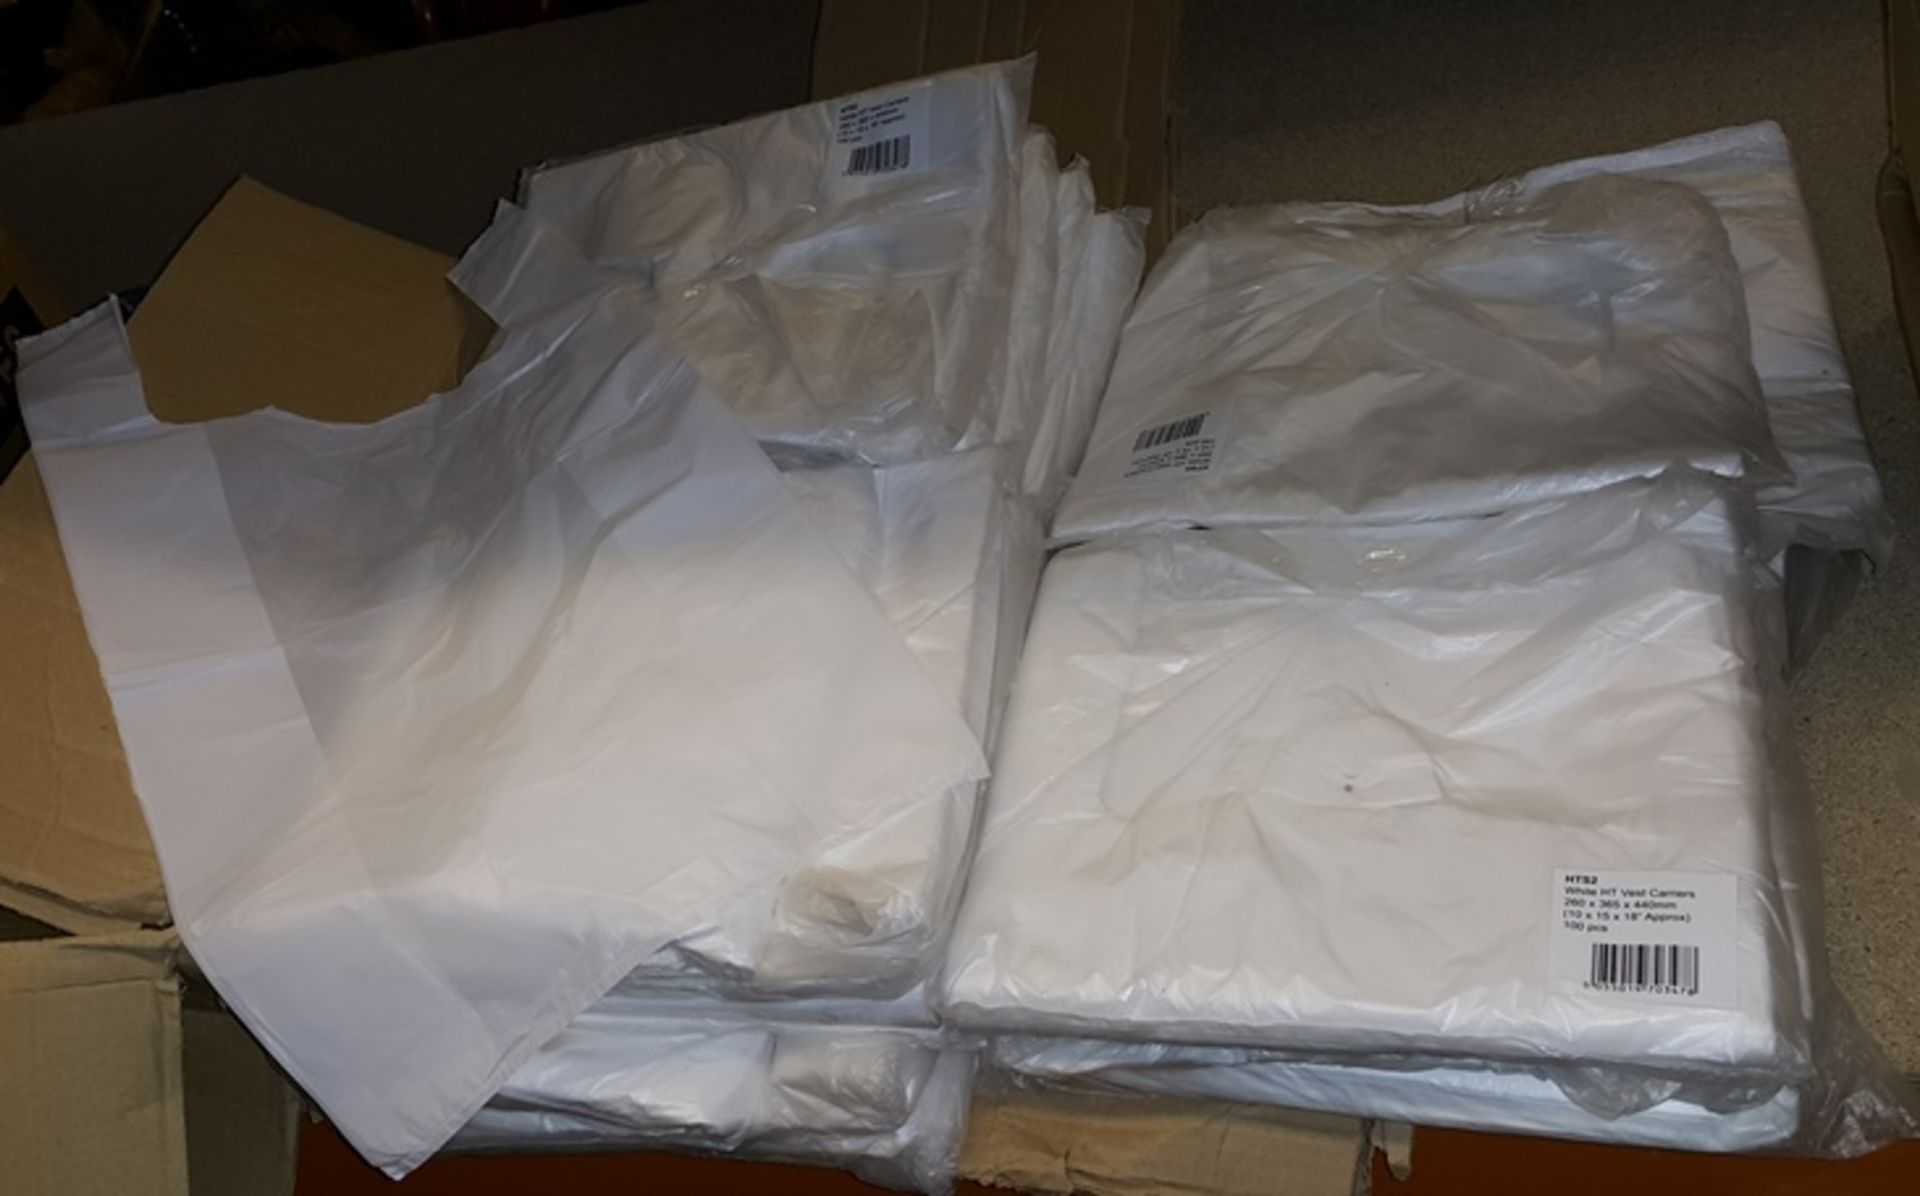 CARRIER BAGS. HTS2. White HT Vest Carriers. 260 x 365 x 440mm. 20 Packs of 100 Bags each.